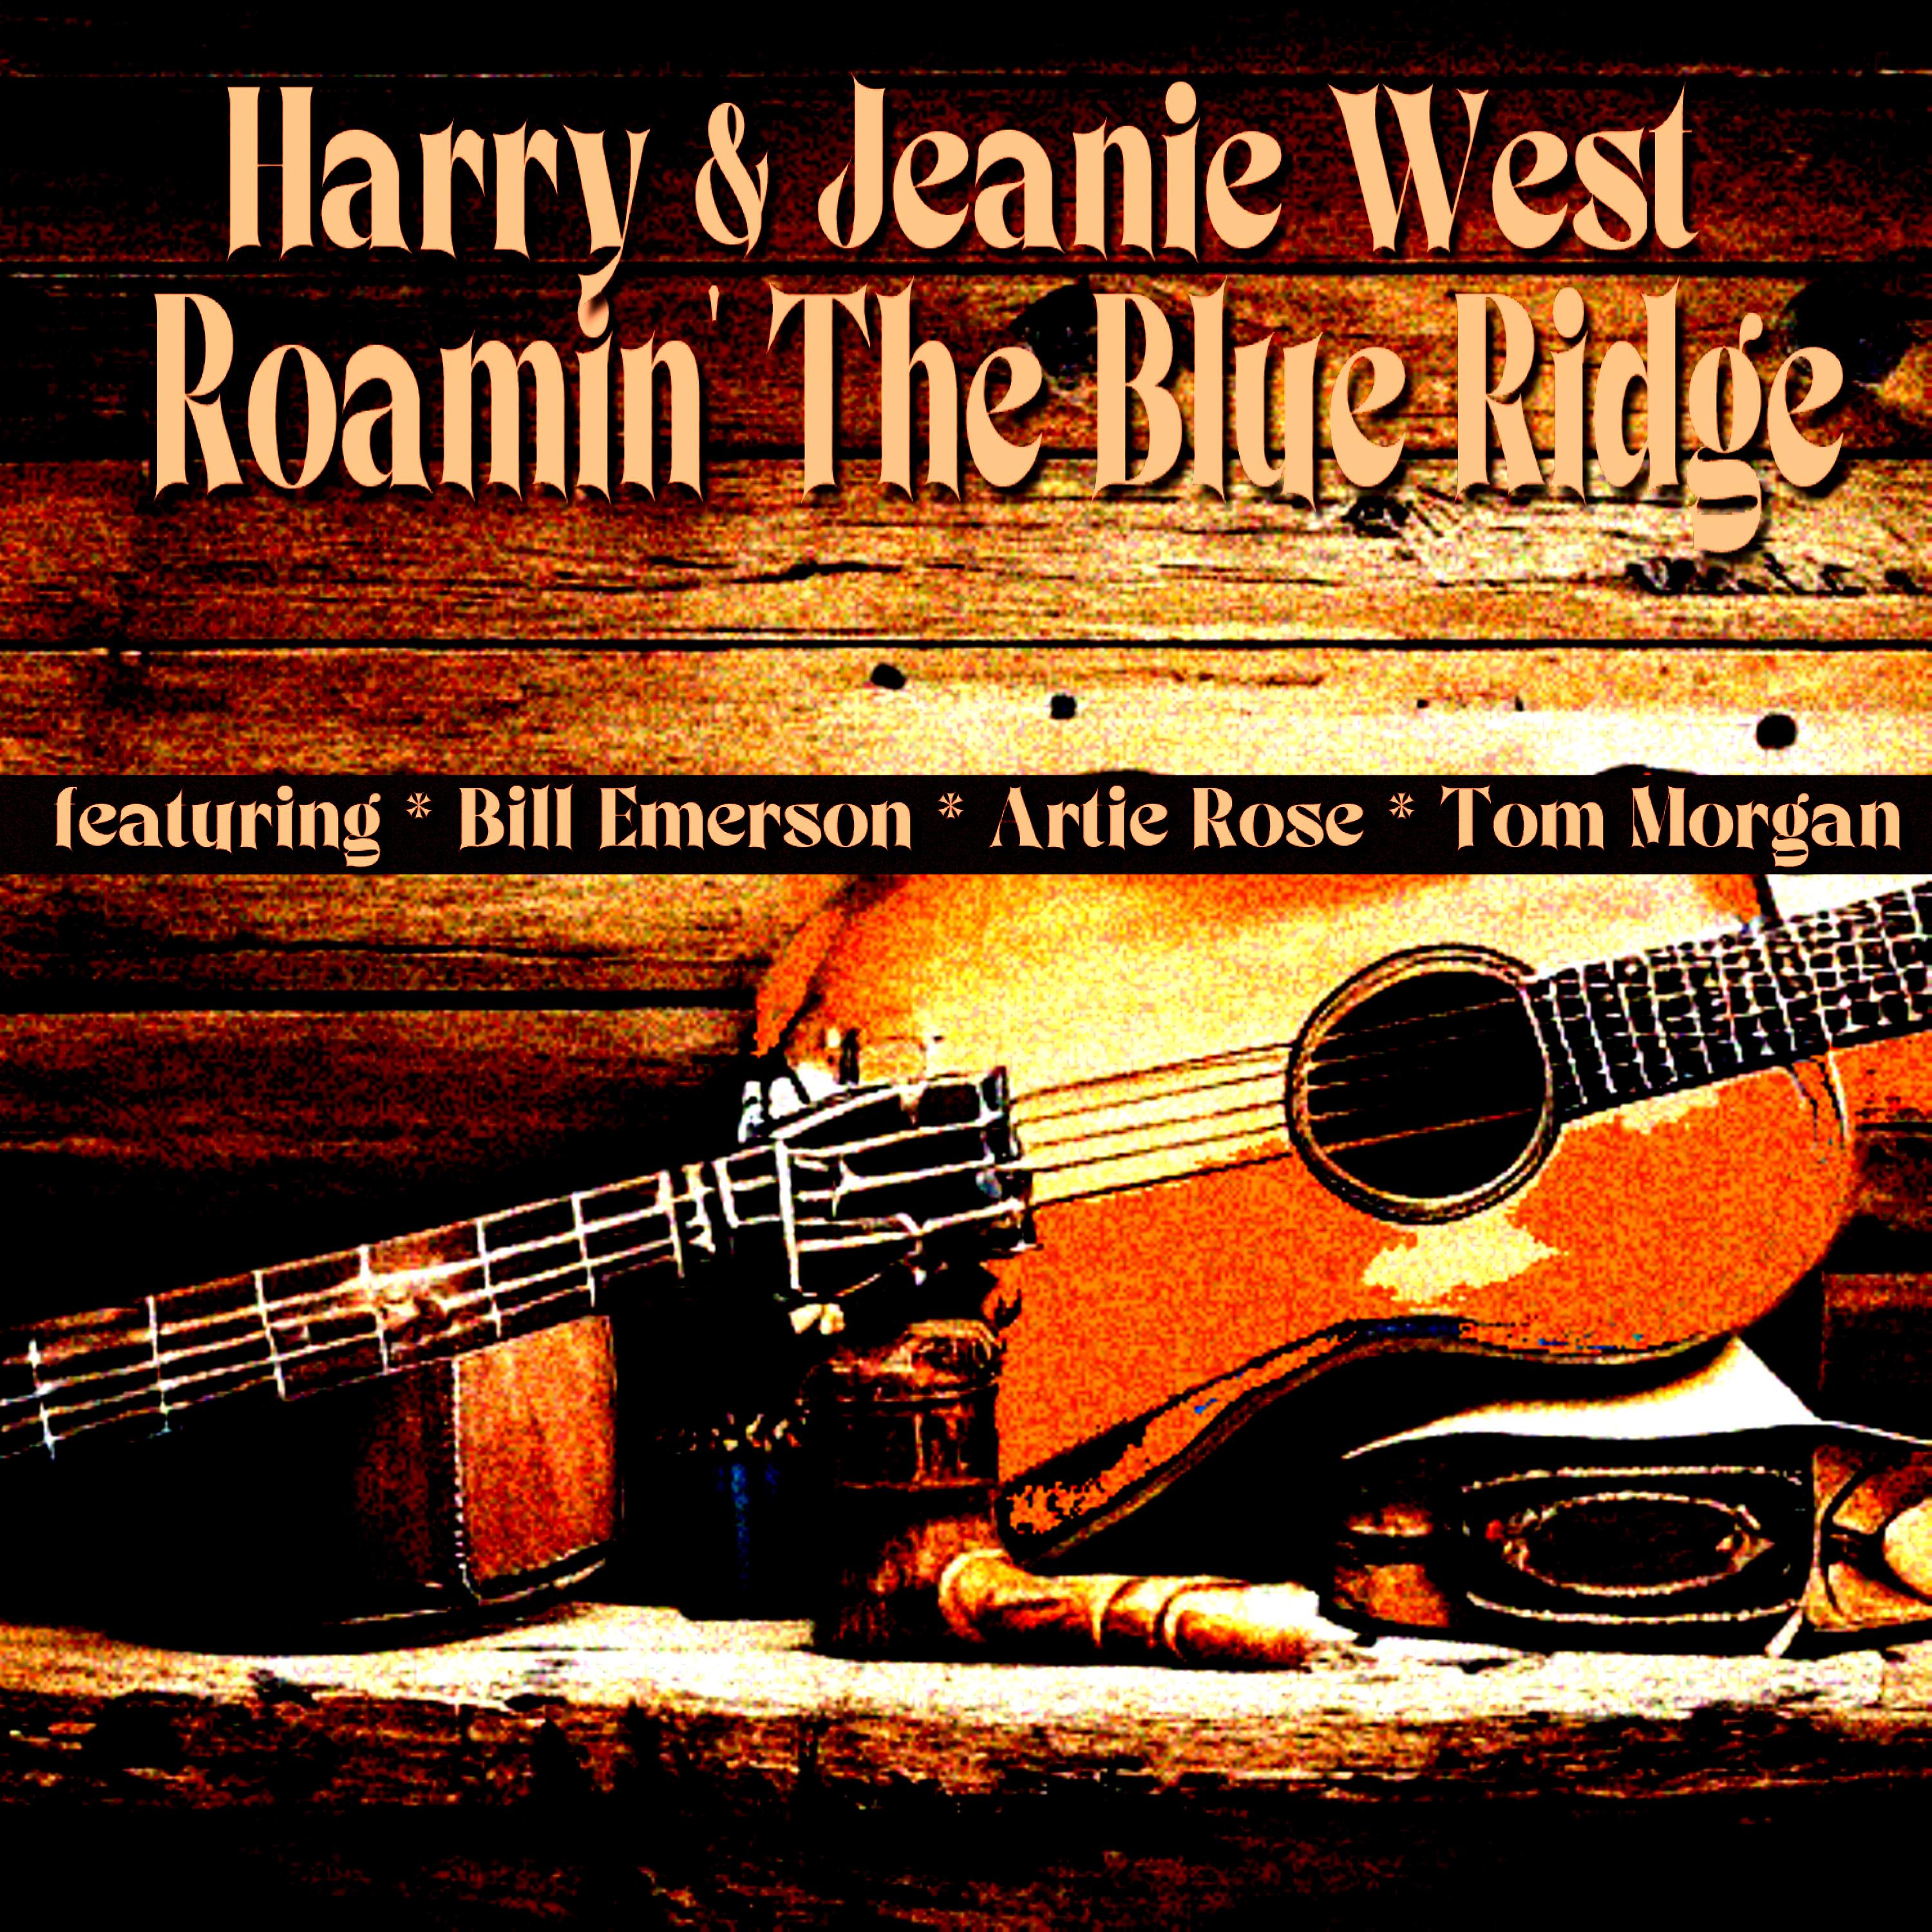 Harry and Jeanie West - Have a Feast Here Tonight (feat. Buill Emerson, Artie Rose, Tom Morgan)